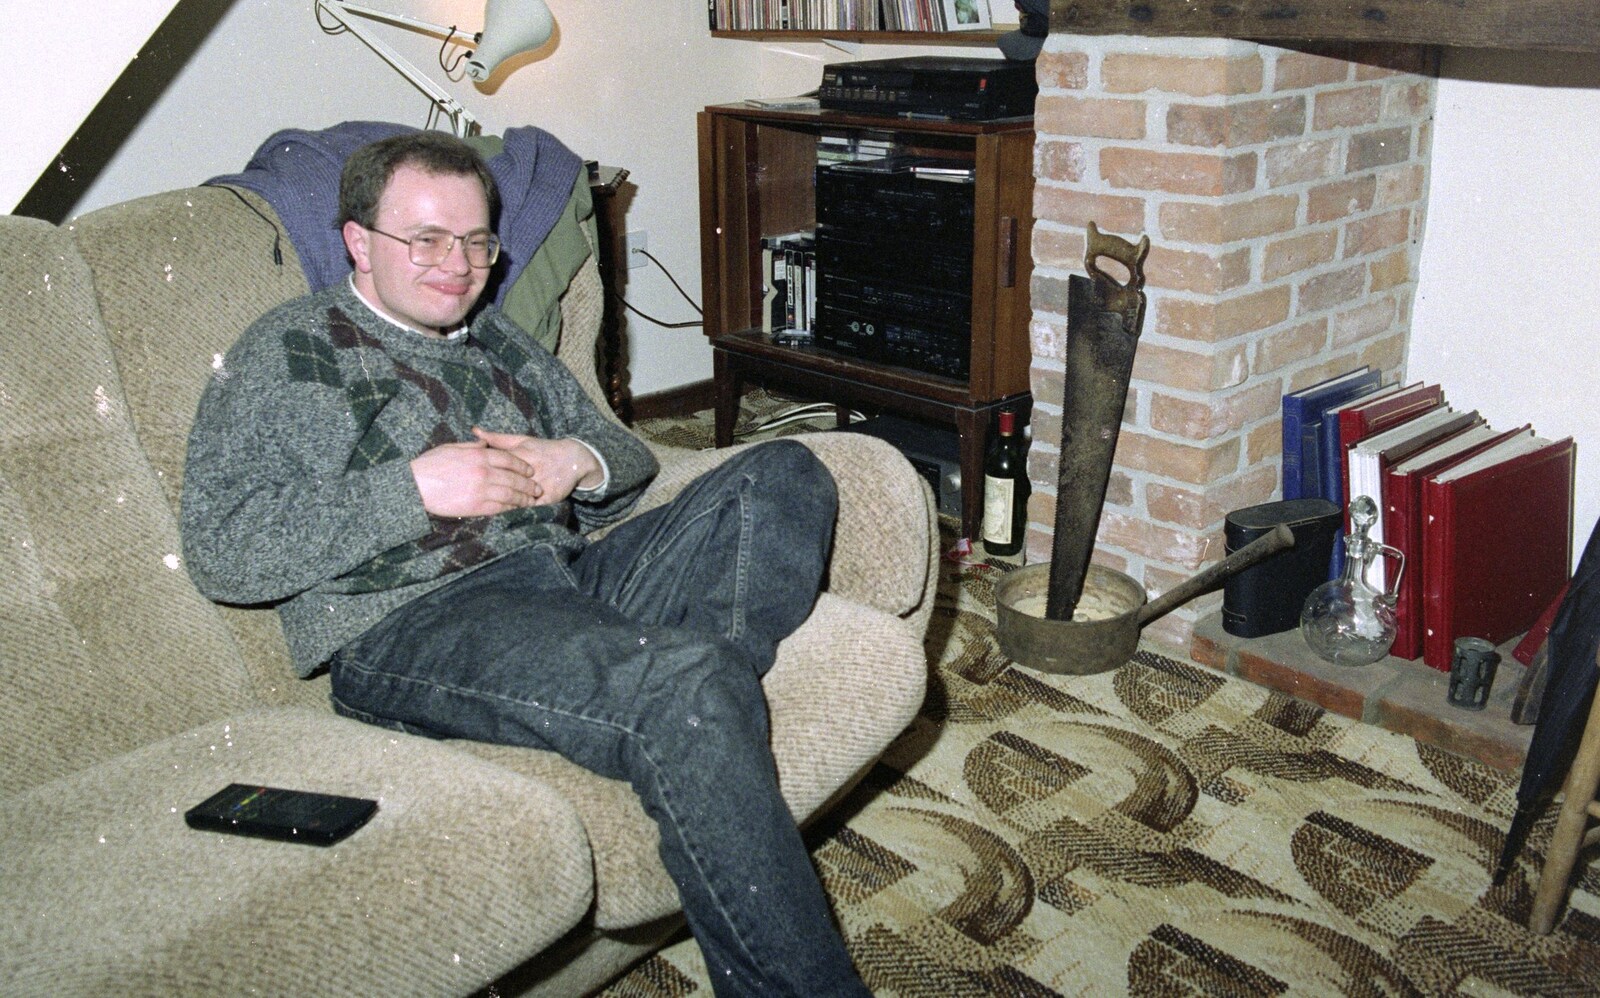 Hamish looks mischevious from Dinner Round Geoff and Brenda's, and Hamish Visits, Stuston, Suffolk - 6th April 1992